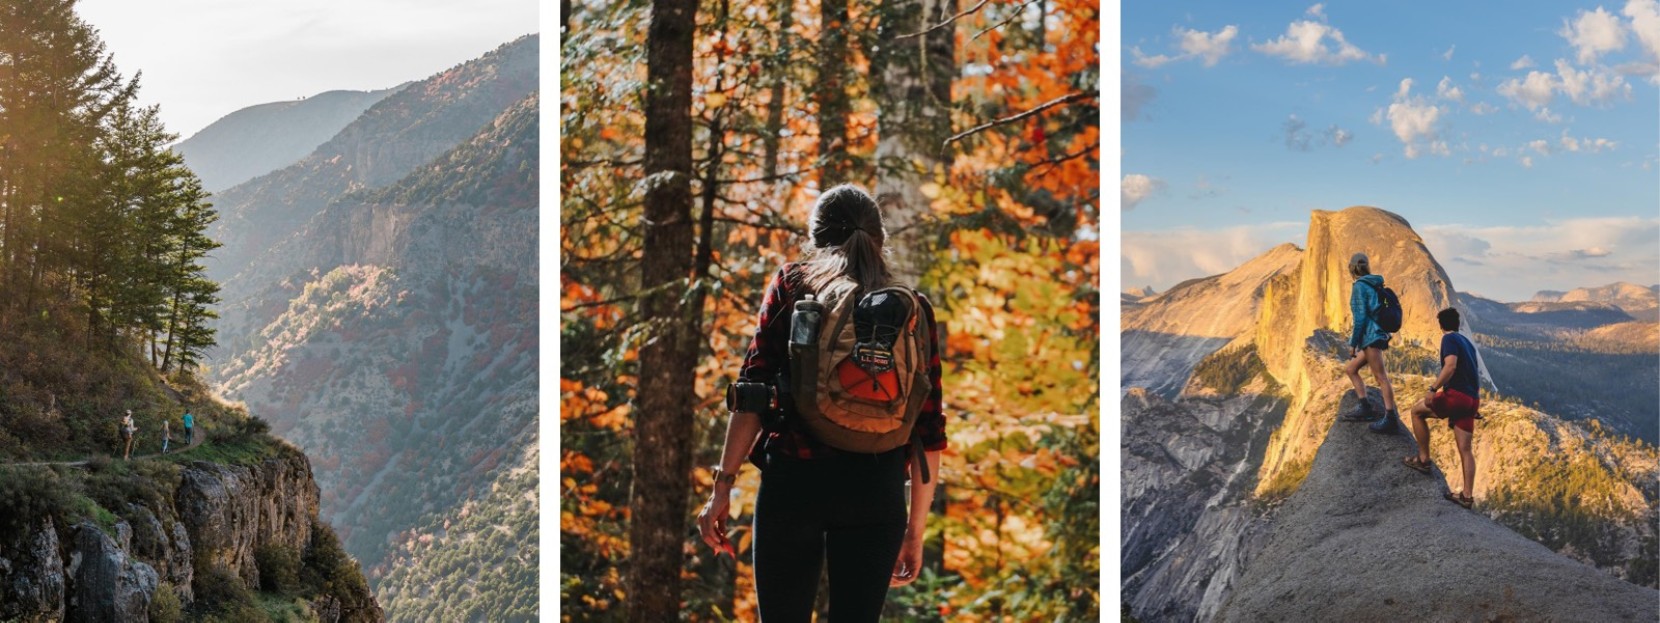 Three images of people hiking on mountain trails and in the woods